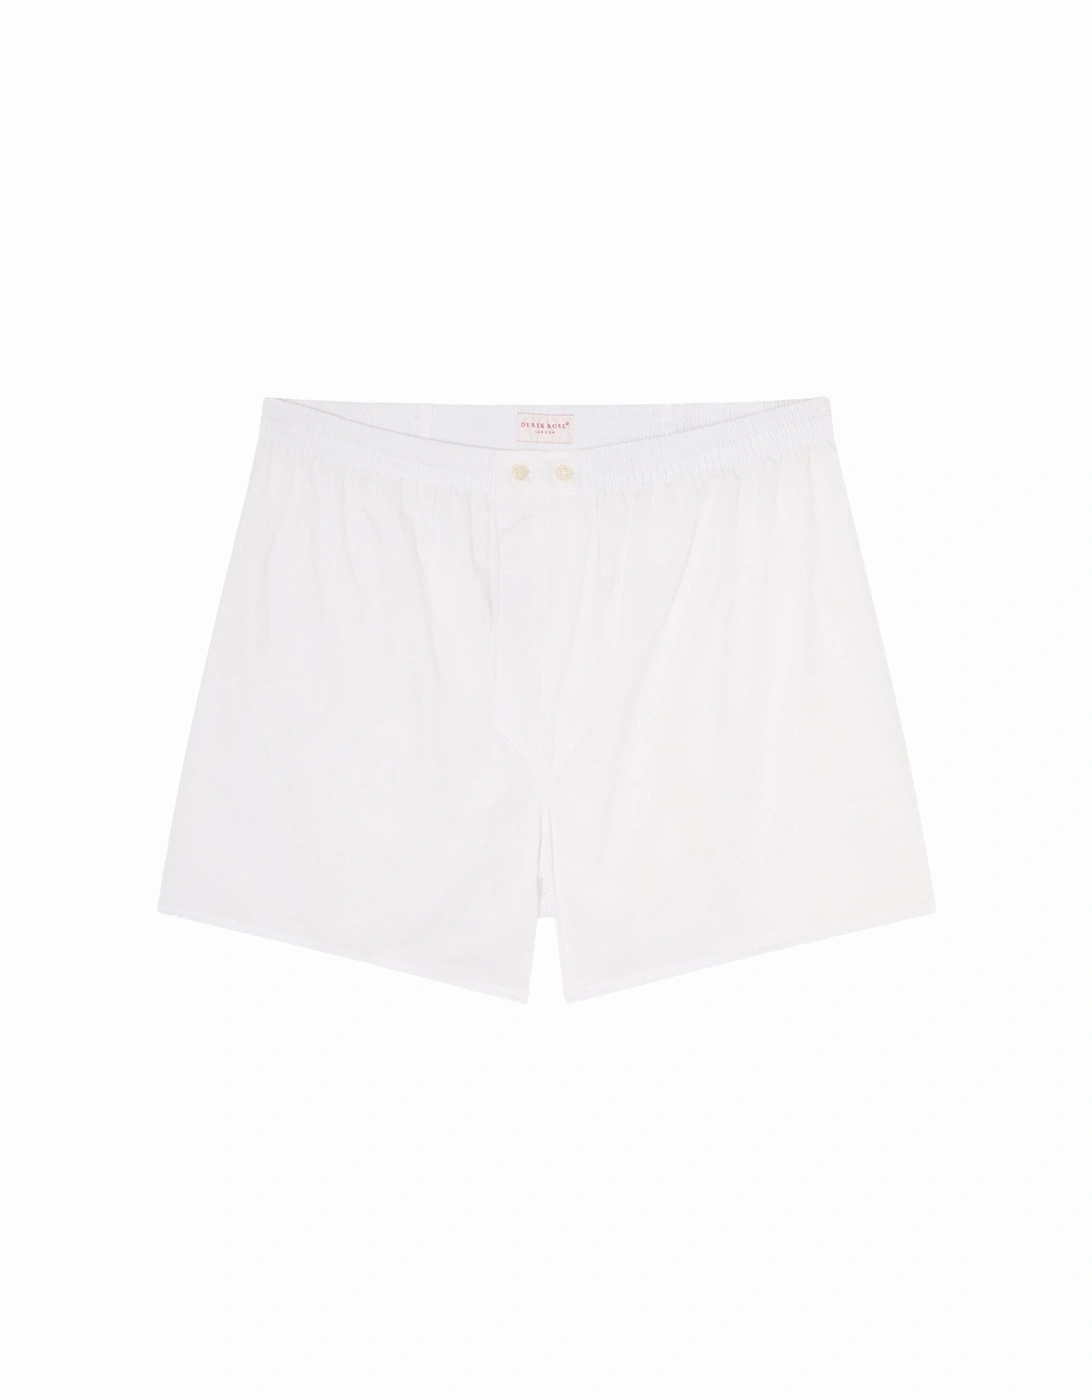 Savoy Classic-Fit Boxer Shorts, White, 2 of 1